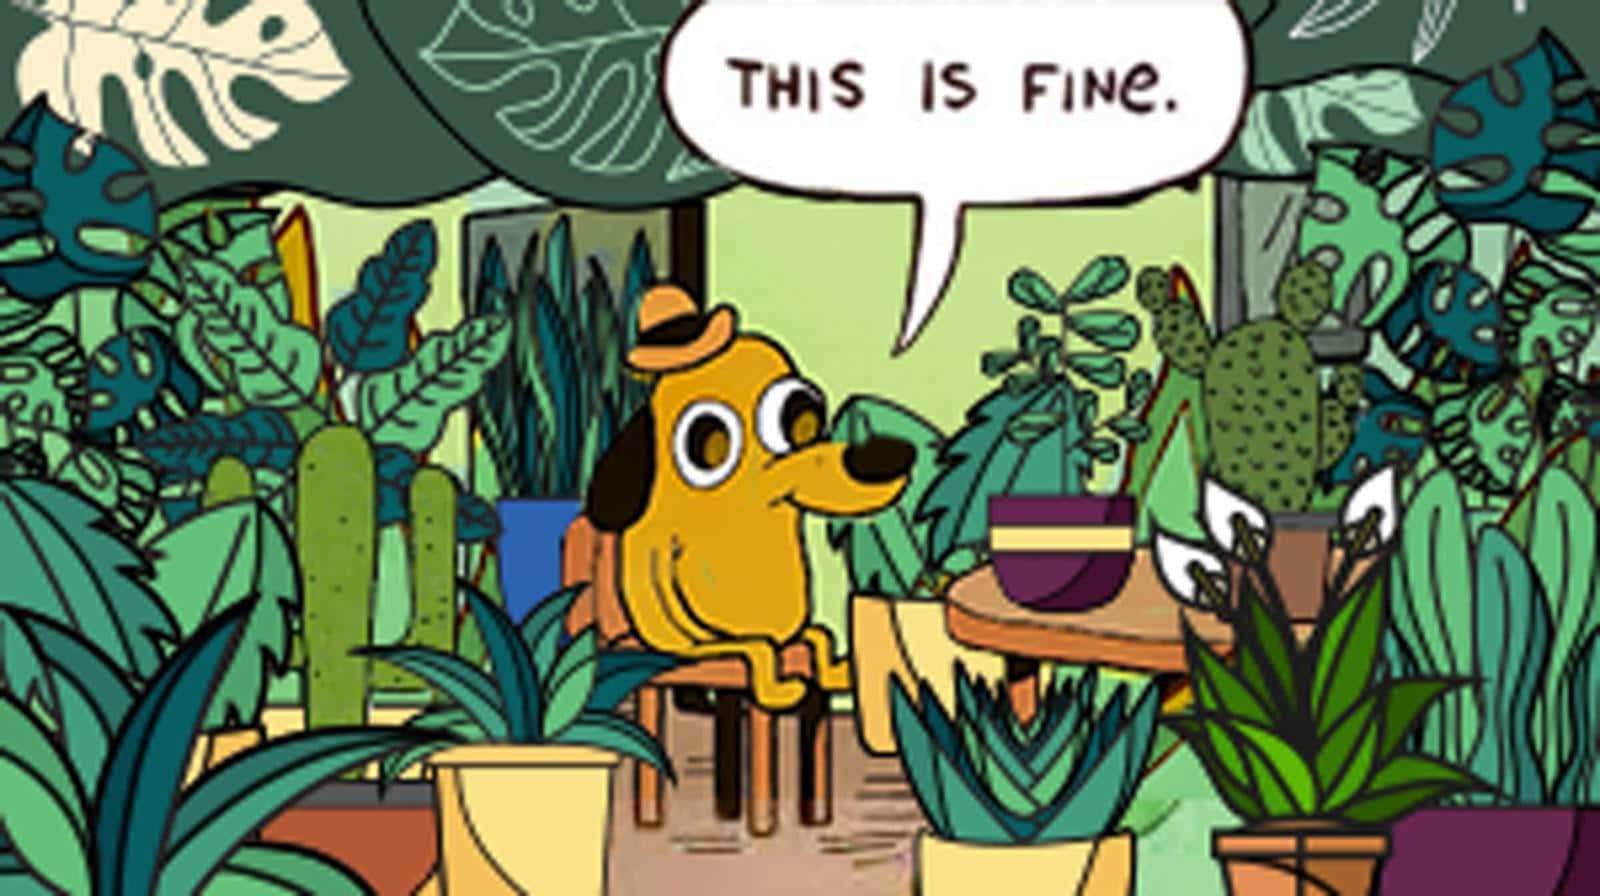 A Cartoon Character Sitting In A Potted Plant With A Cartoon Saying This Is Fine Wallpaper